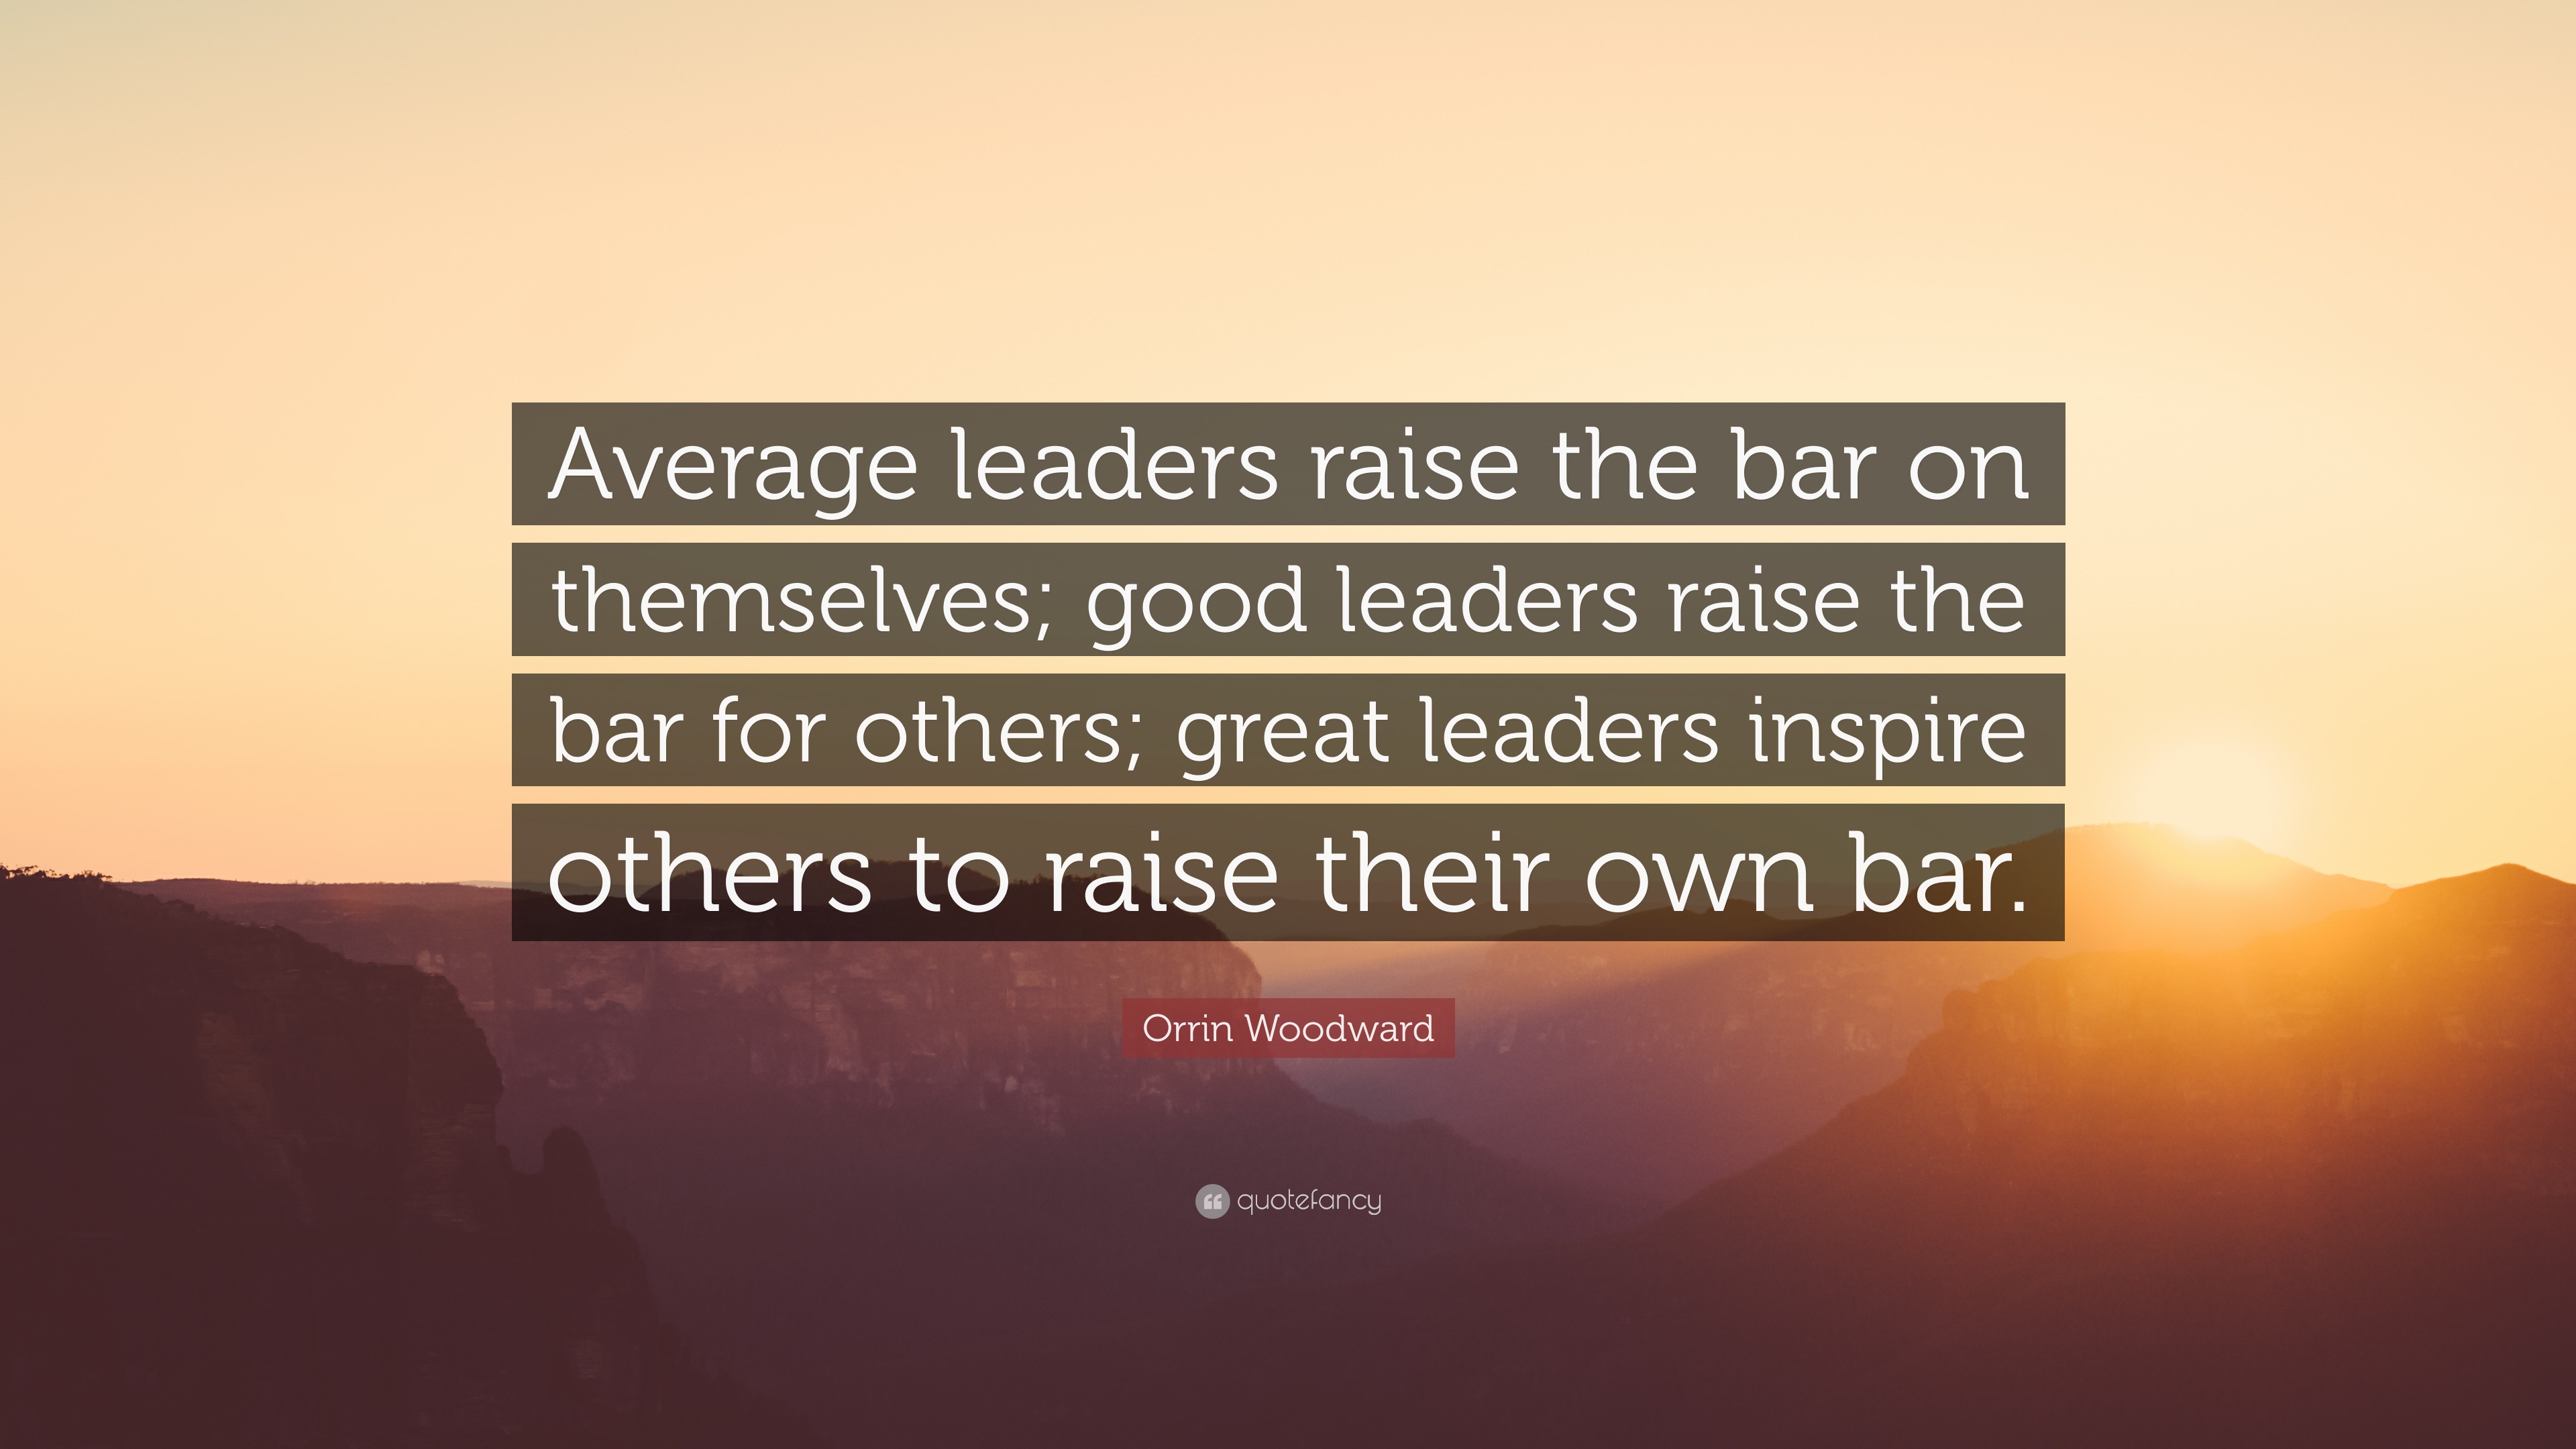 Orrin Woodward Quote: “Average leaders raise the bar on themselves